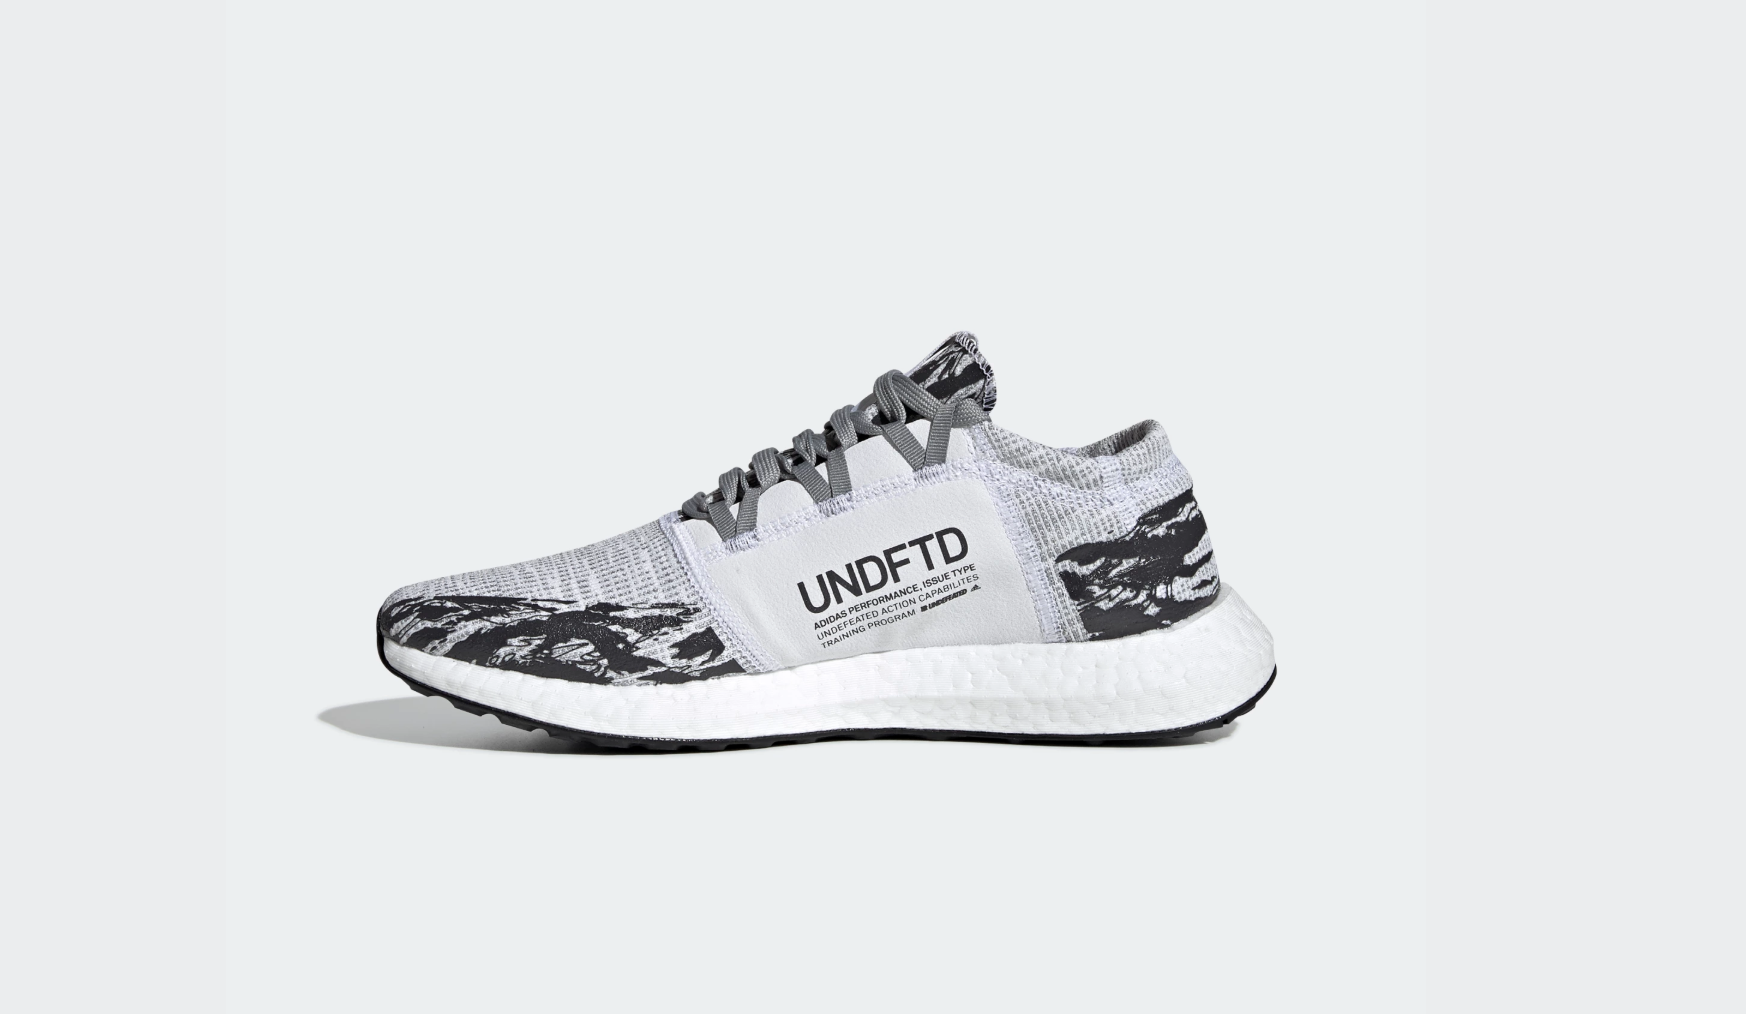 Adidas X Undefeated PureBoost Go Review | Adidas Distance Running Shoes